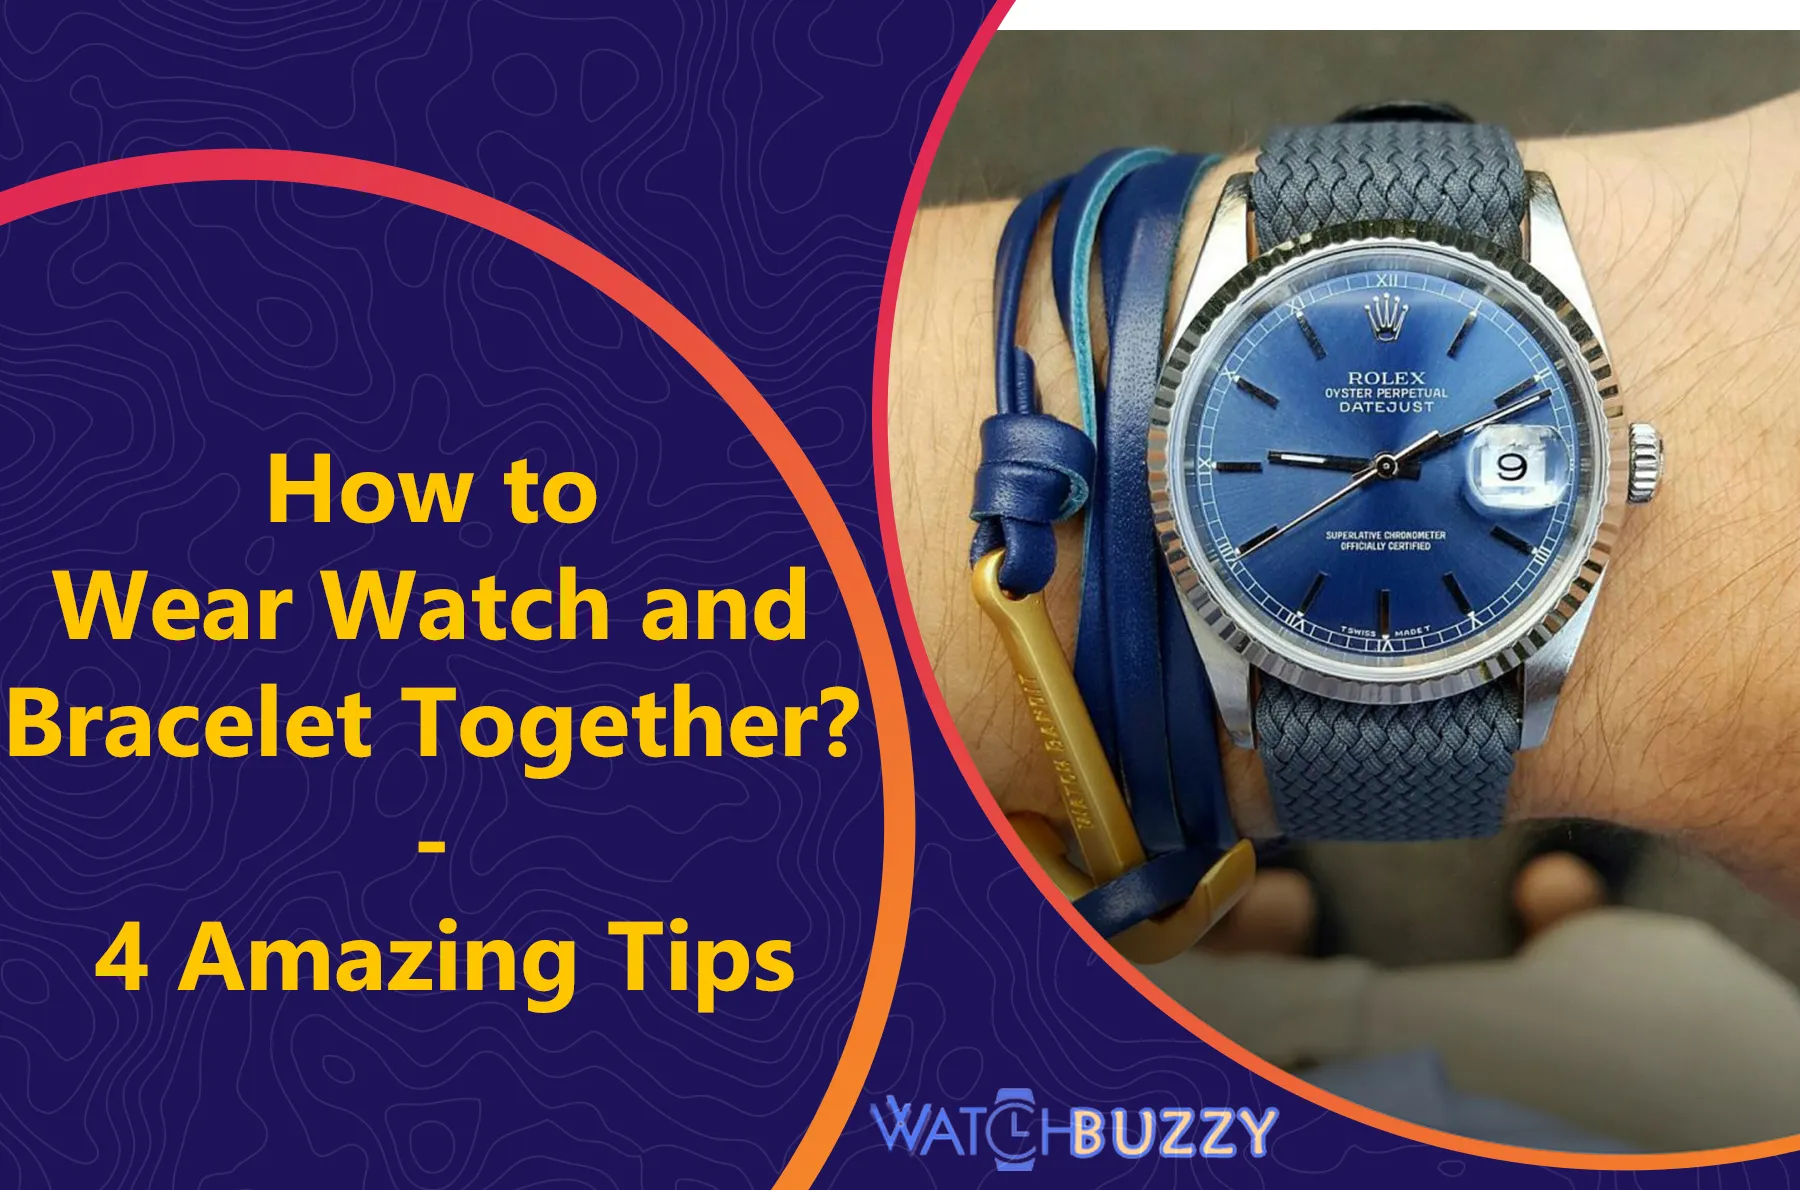 How to Wear Watch and Bracelet Together? - 4 Amazing Tips